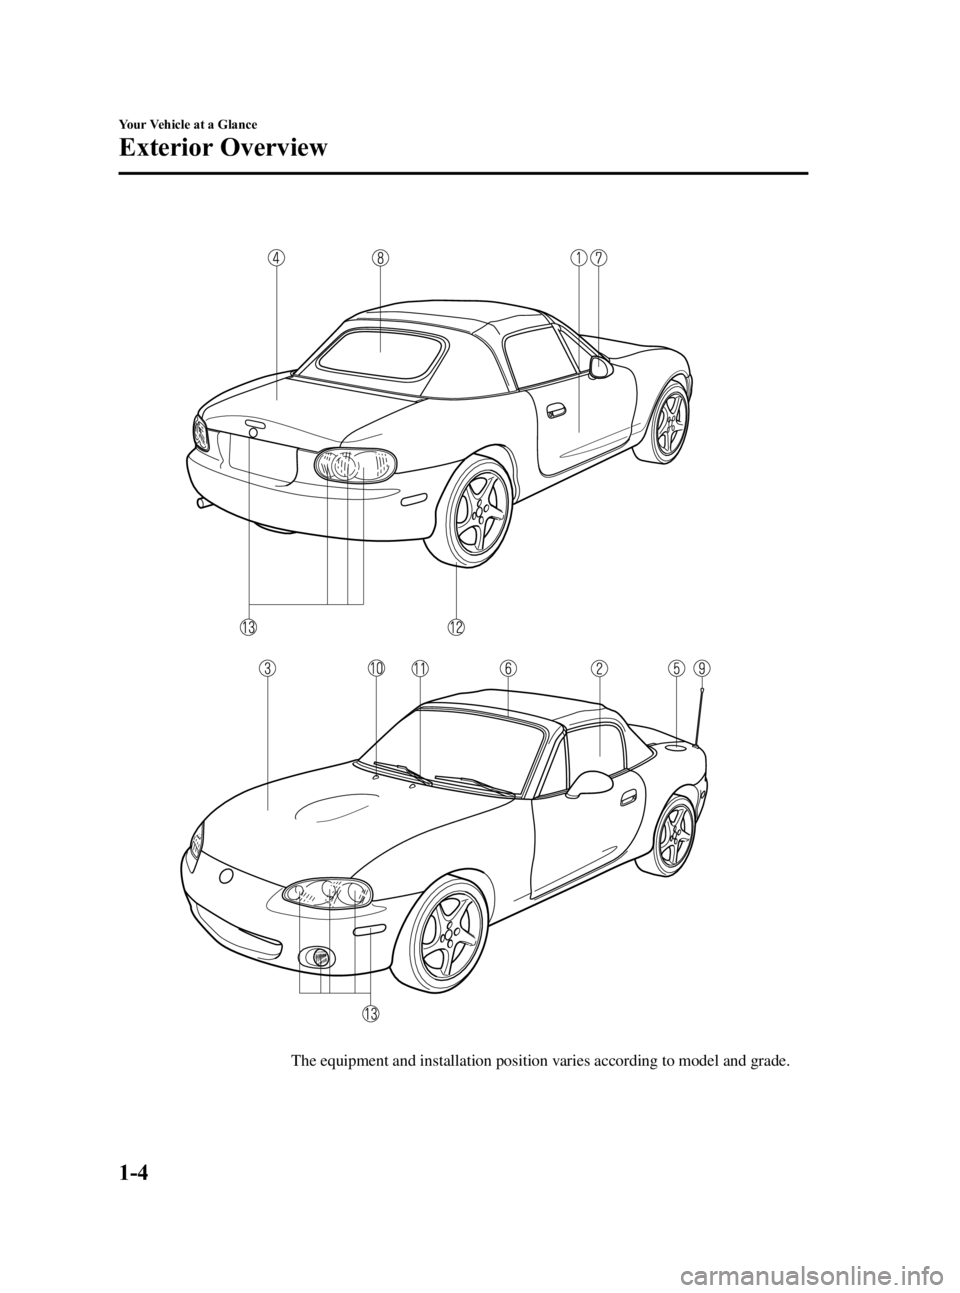 MAZDA MODEL MX-5 MIATA 2005  Owners Manual Black plate (10,1)
The equipment and installation position varies according to model and grade.
1-4
Your Vehicle at a Glance
Exterior Overview
MX-5 Miata_8T72-EA-04G_Edition2 Page10
Tuesday, August 31